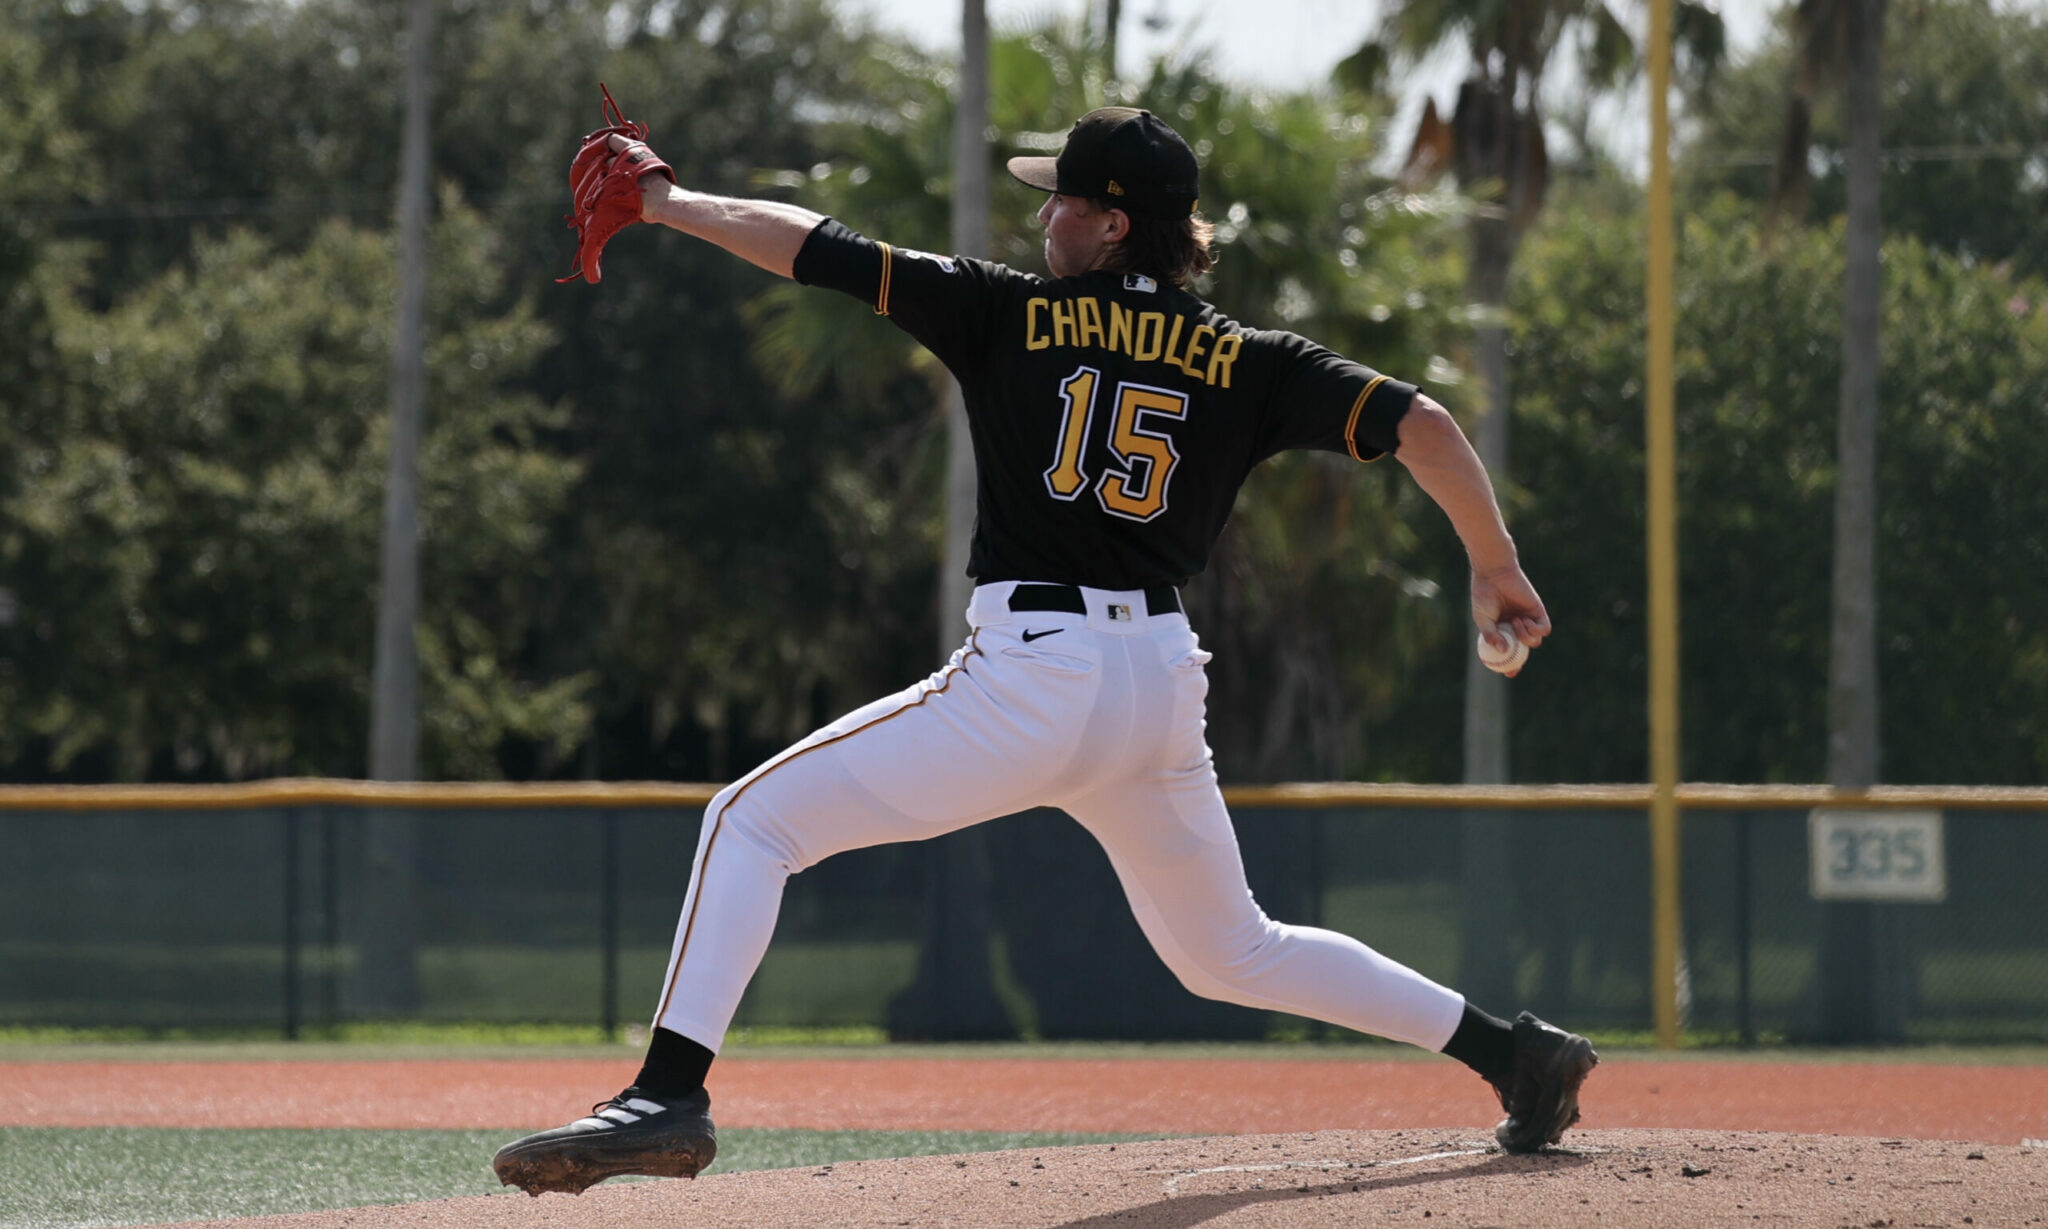 Prospect Notes: Chandler, Solometo and Cheng Impress; Indianapolis is Among the Best